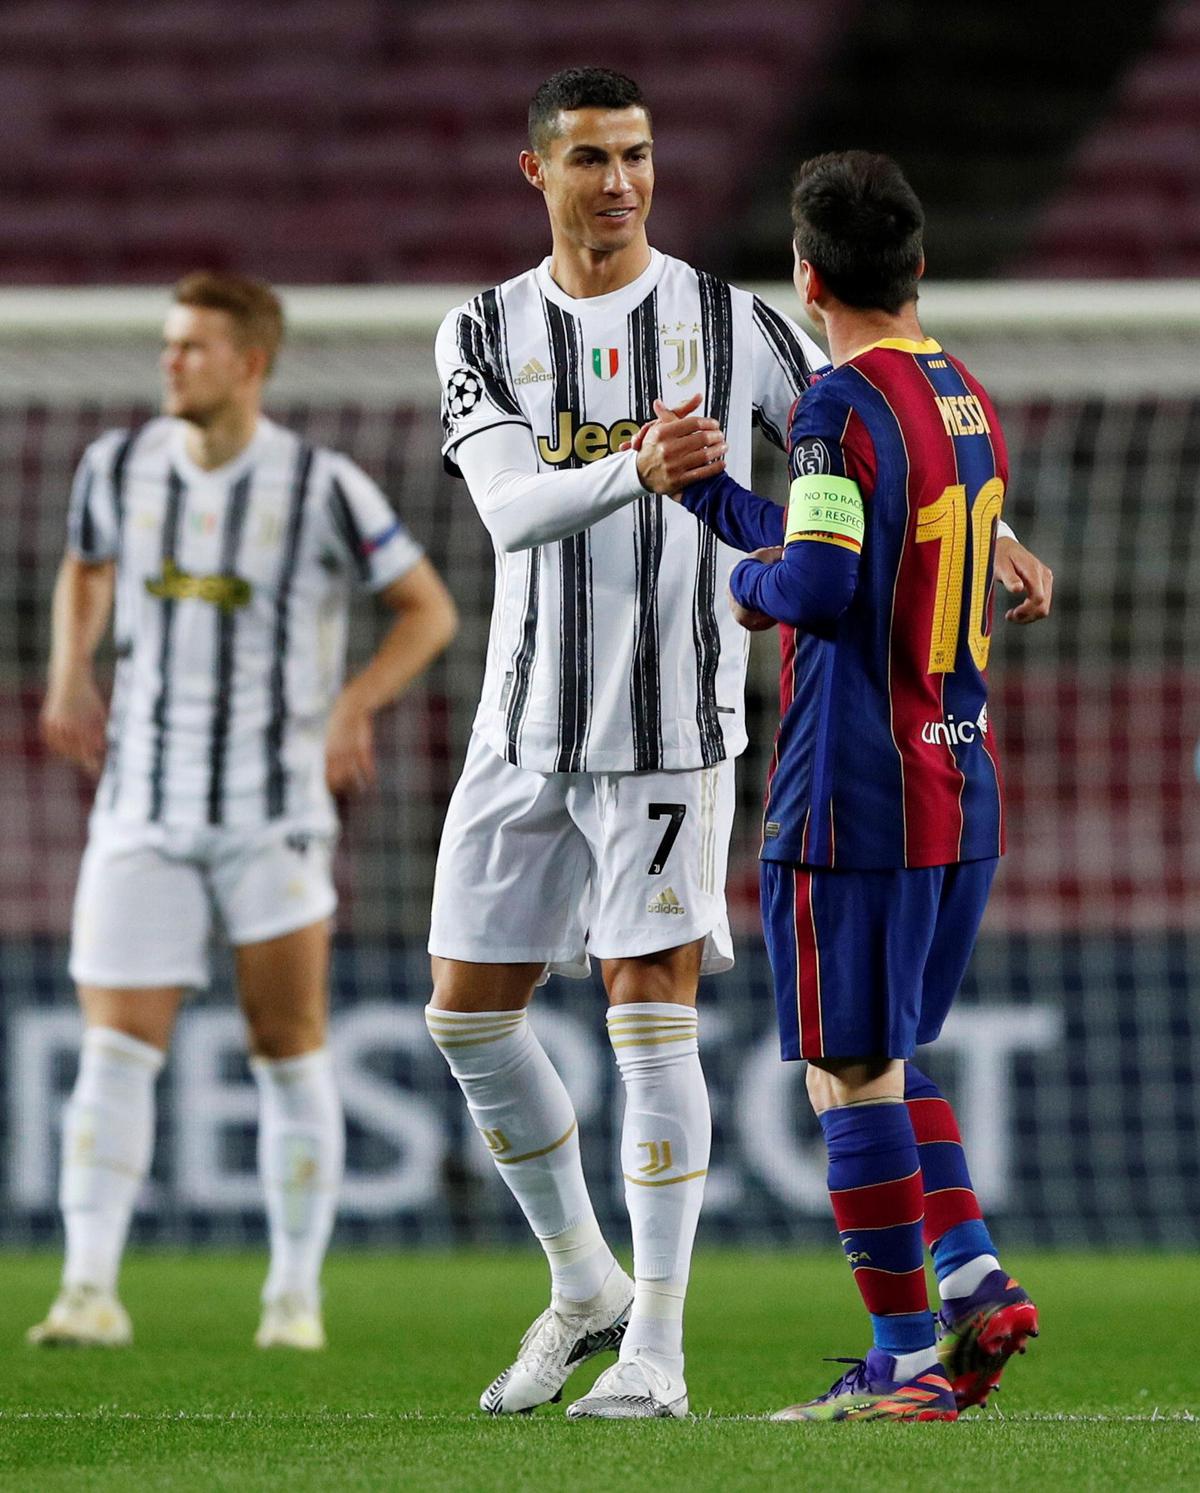 The El Clasico Game that was Shown on the Photo of Messi and Ronaldo  Playing Chess